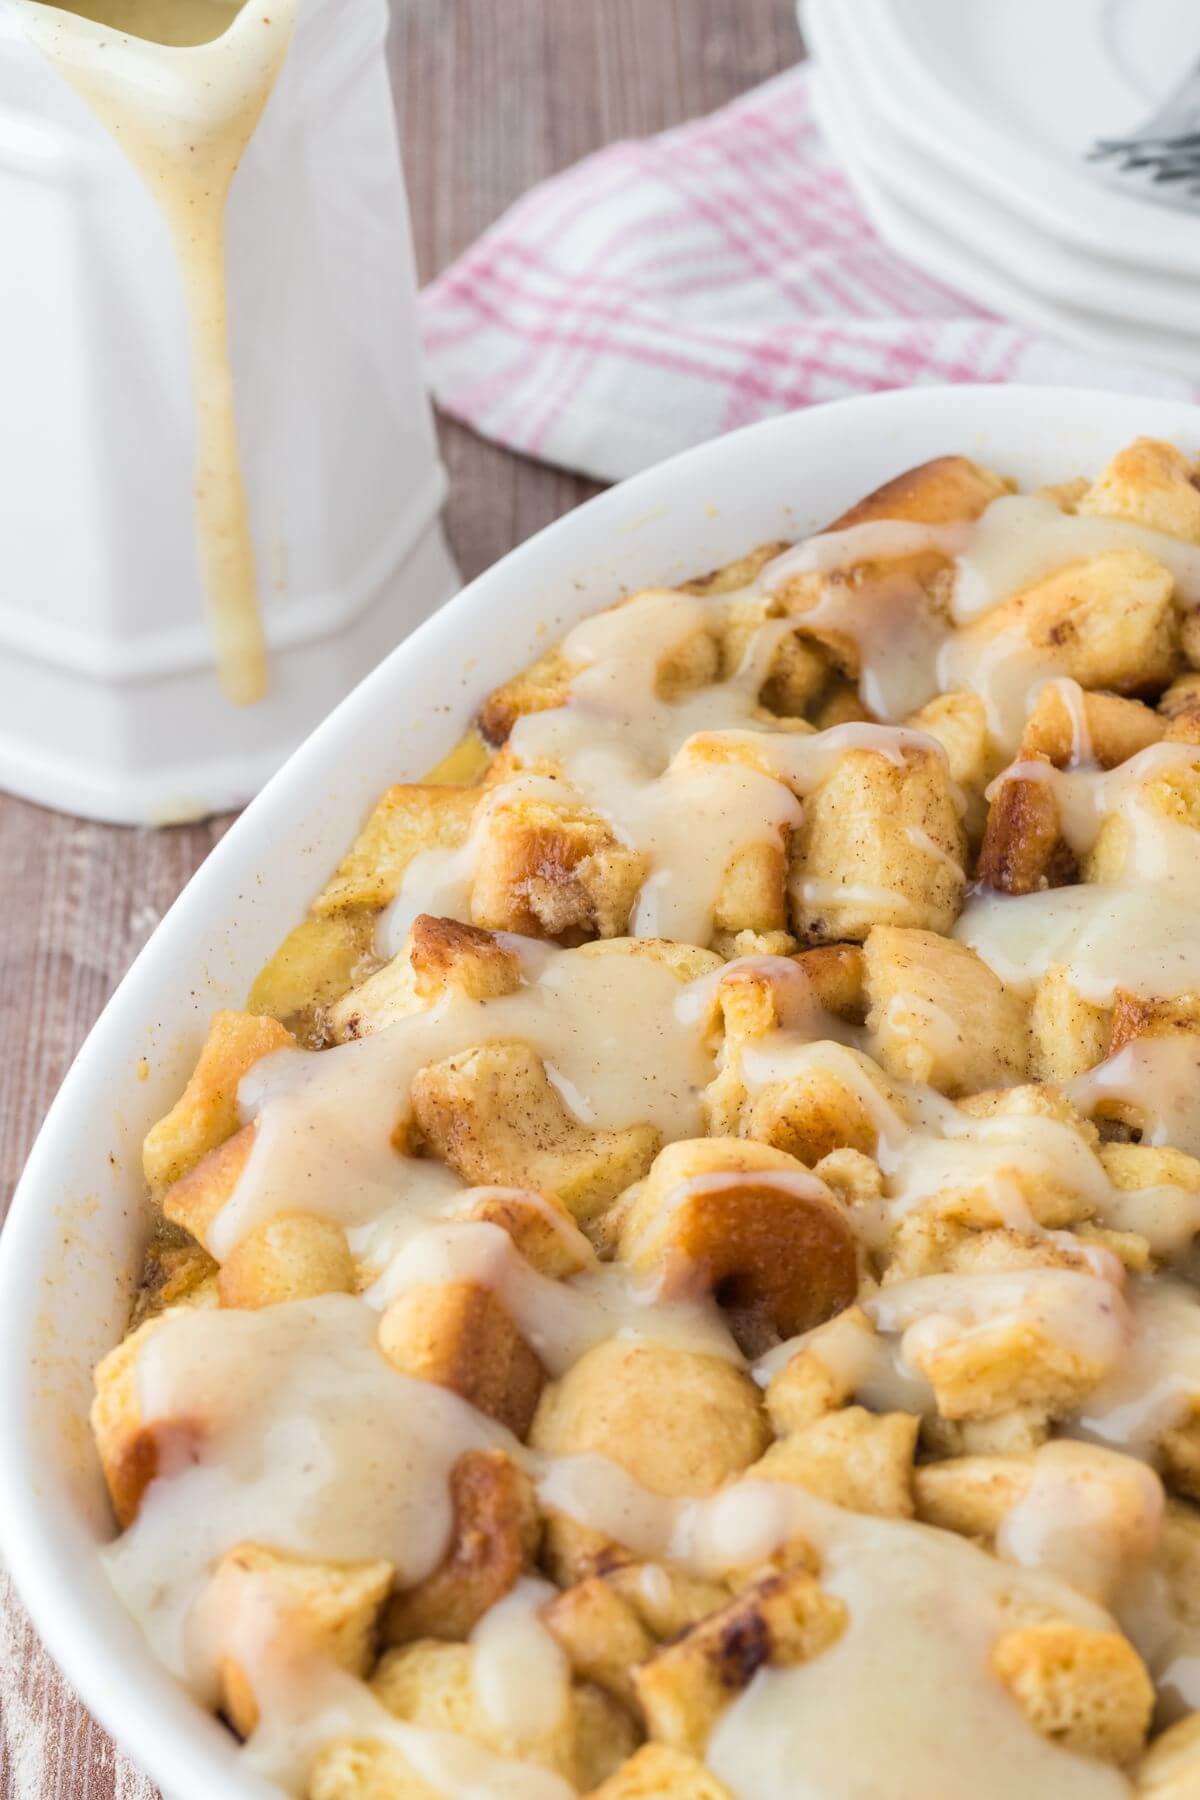 A completely full baking dish shows morsels of cinnamon roll mixed together with a white glaze next to a pitcher of glaze.